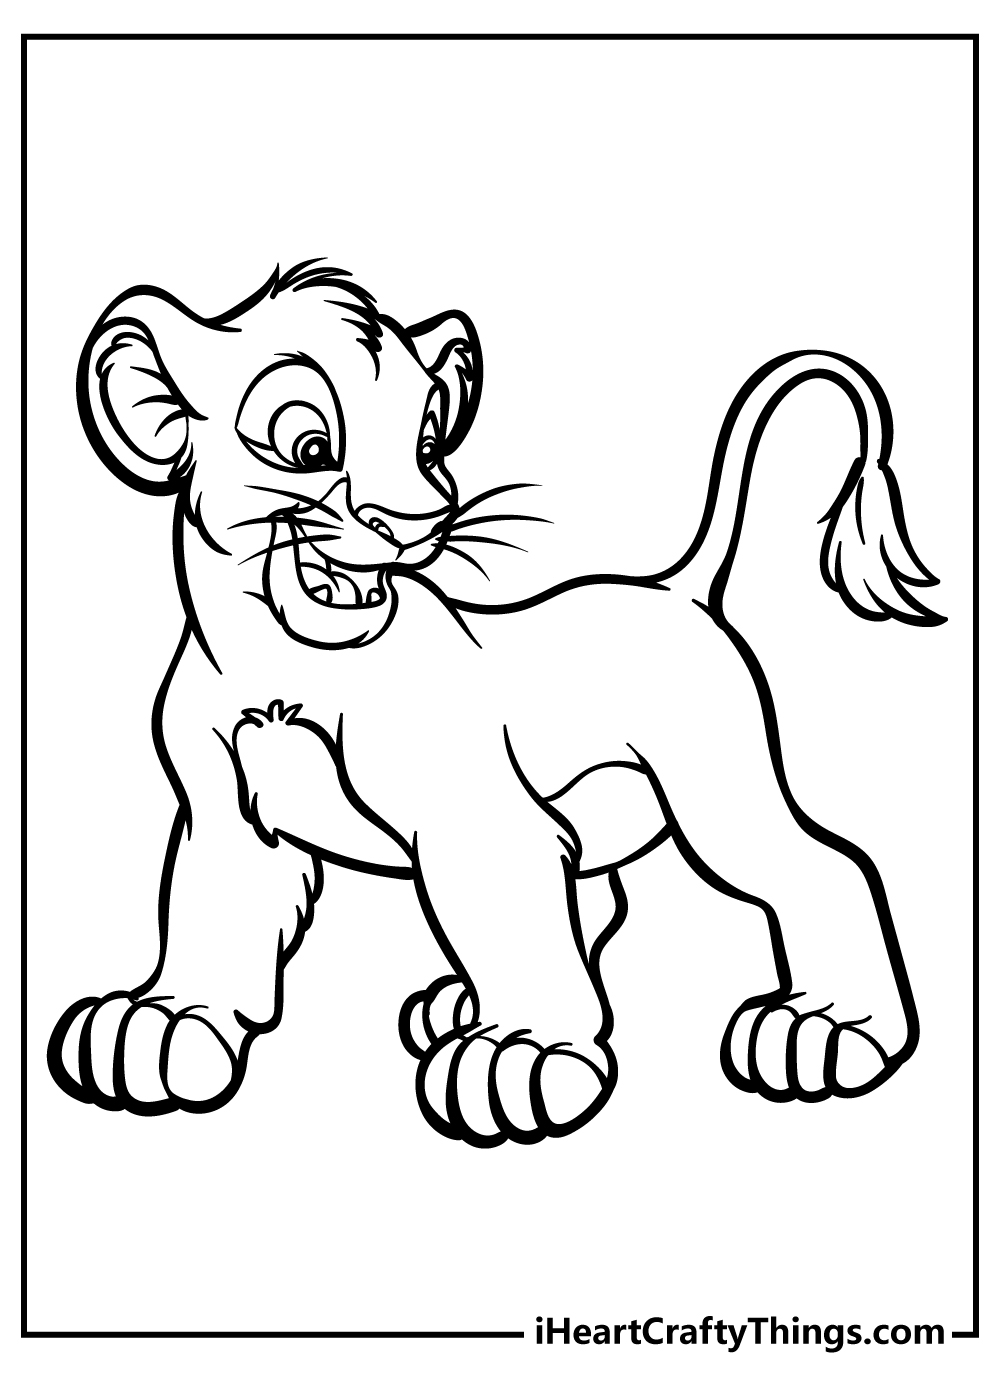 Lion king coloring pages free printables